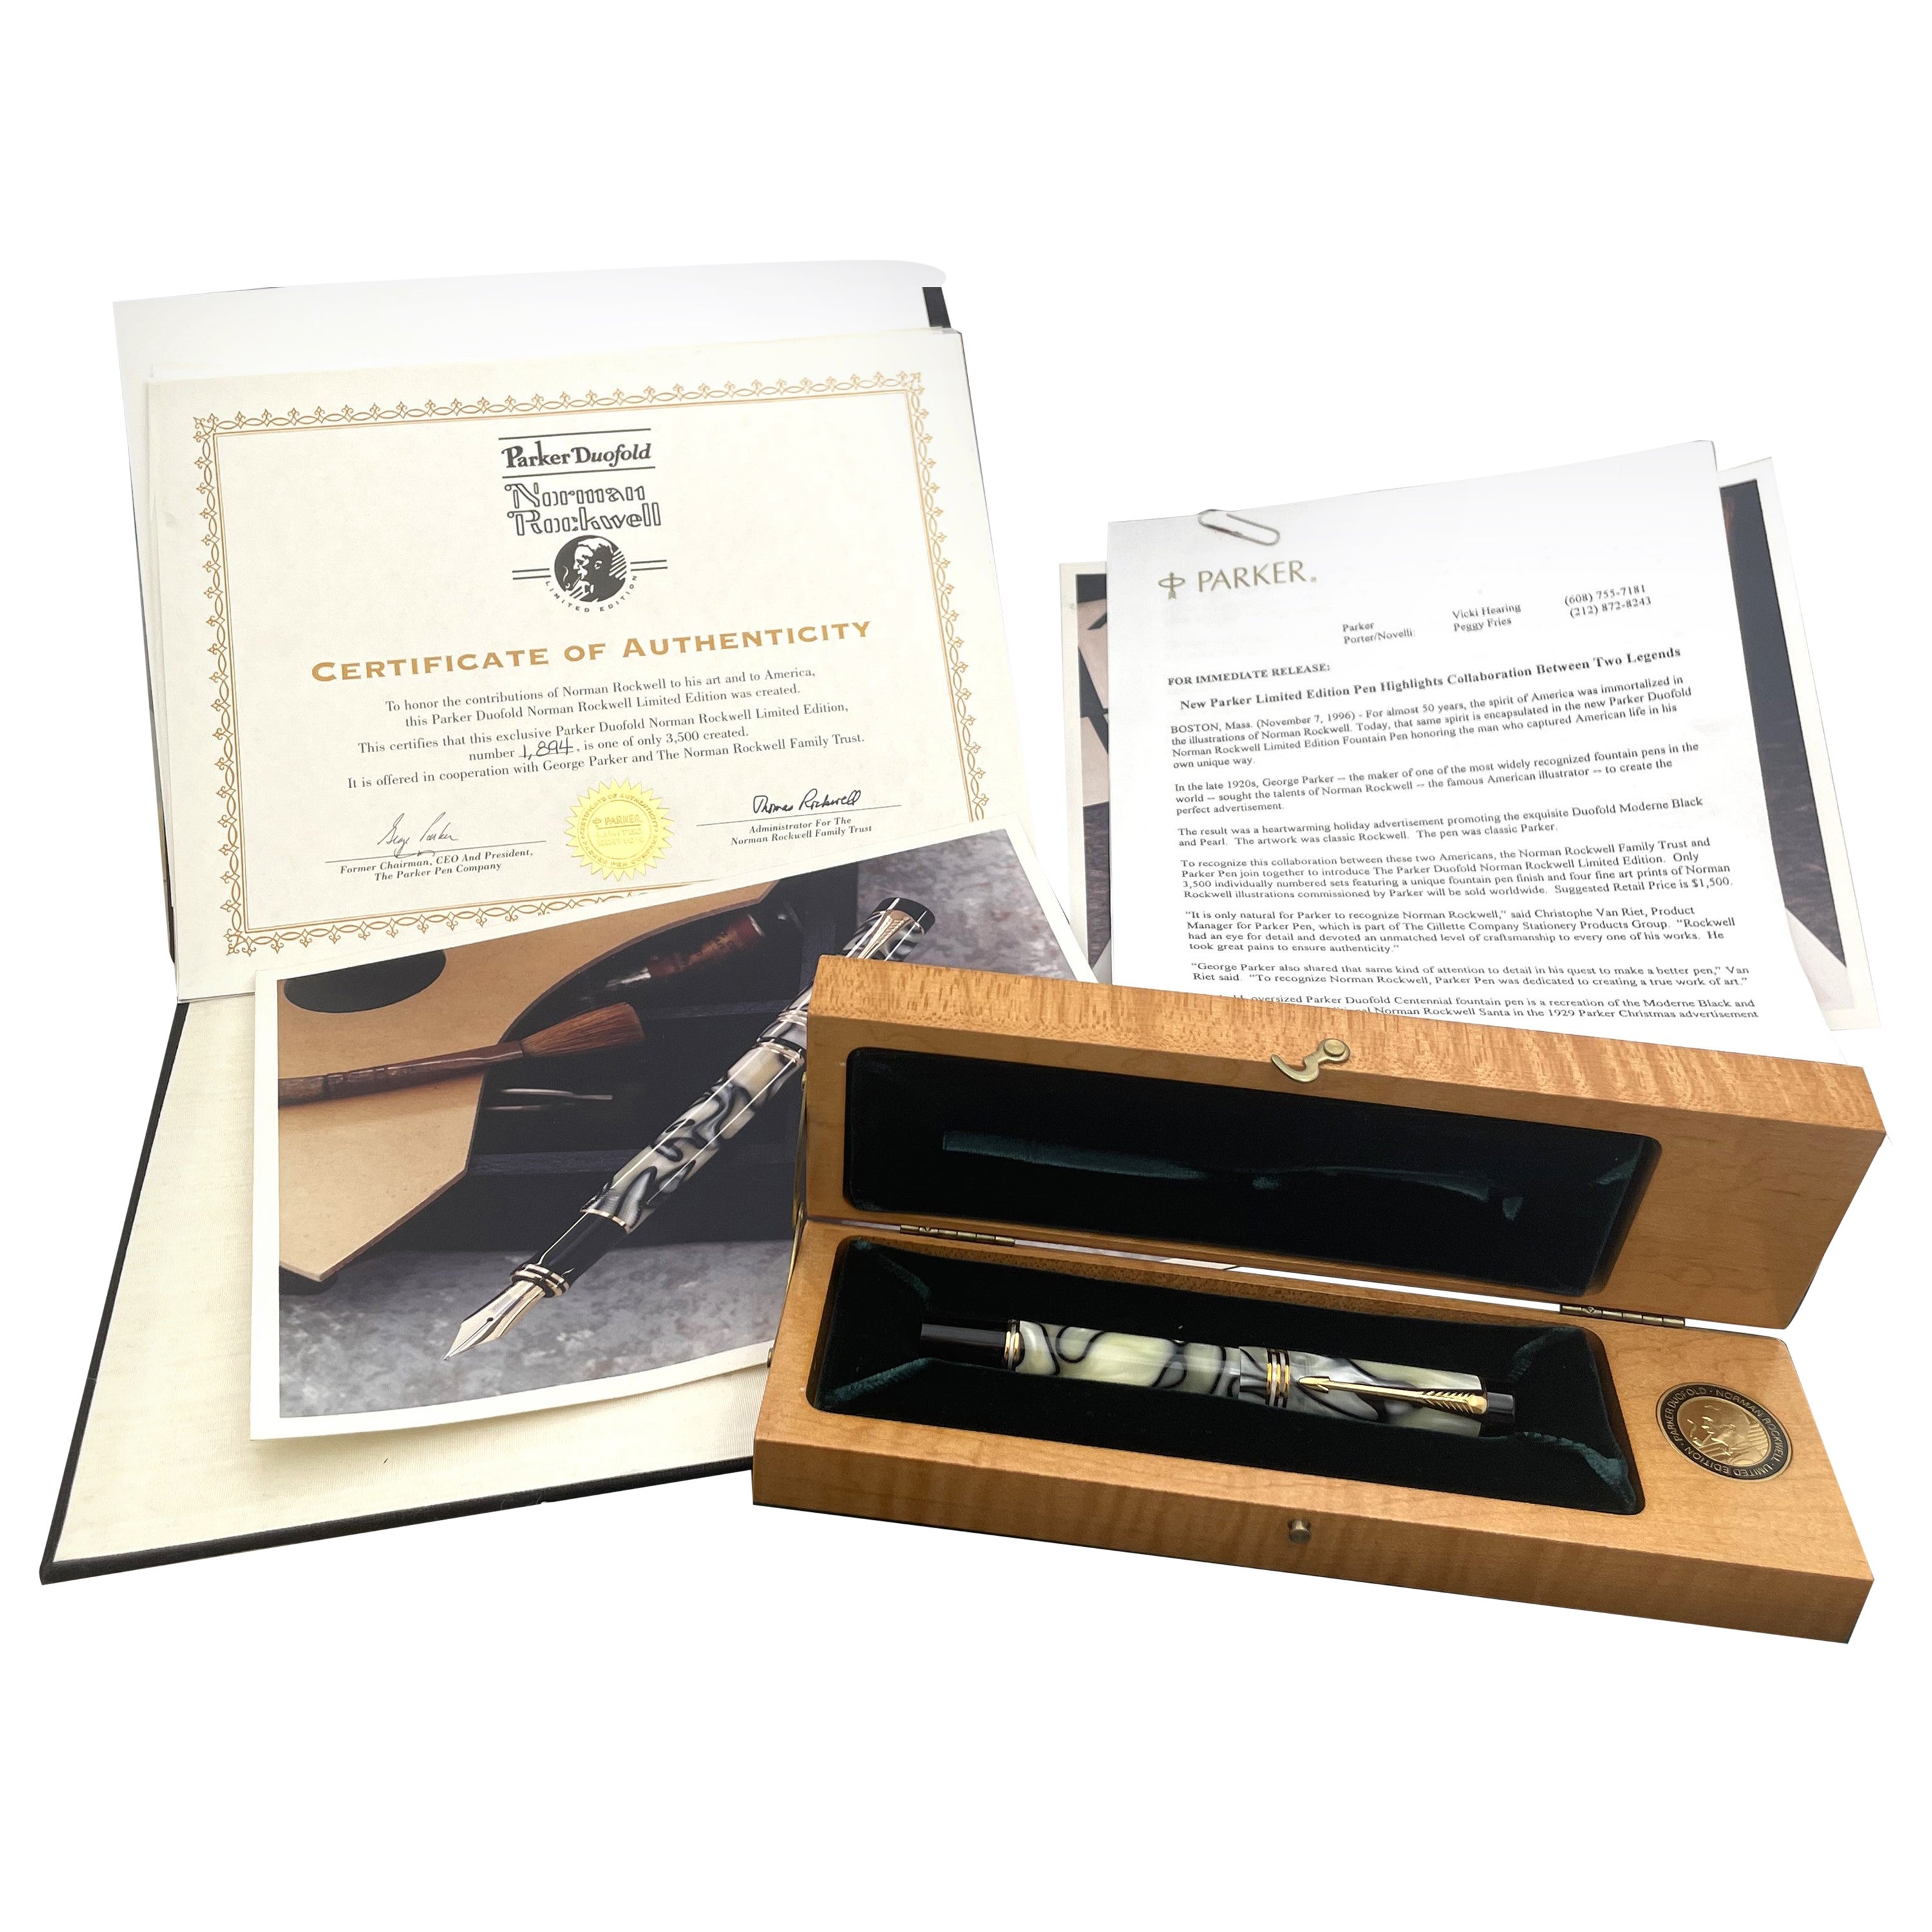 Parker Norman Rockwell Limited Edition Fountain Pen w/ Rare Documents & Prints